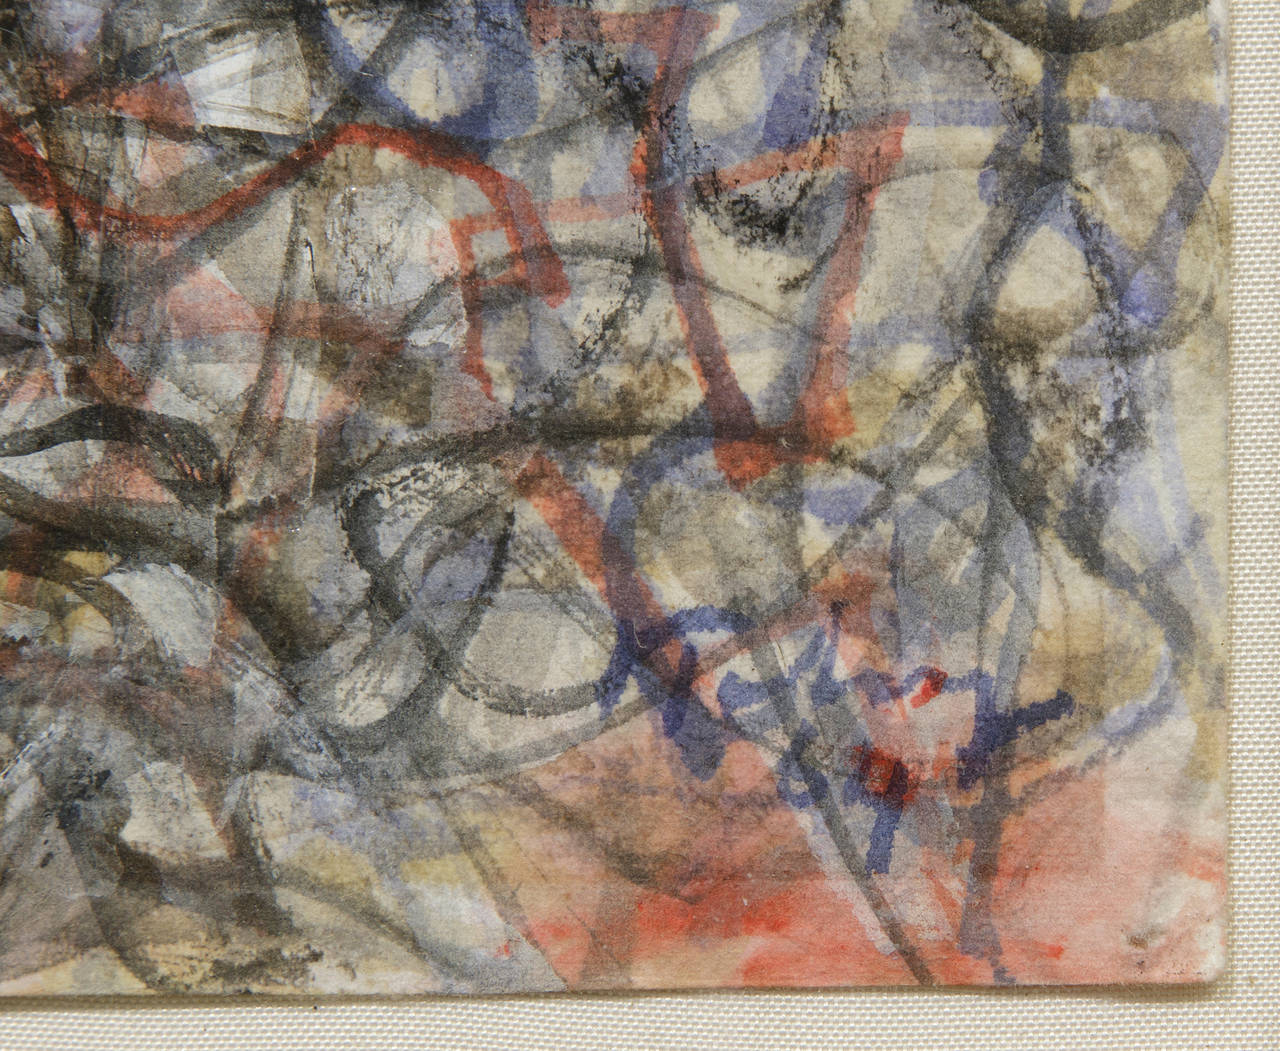 Untitled - Painting by Mark Tobey